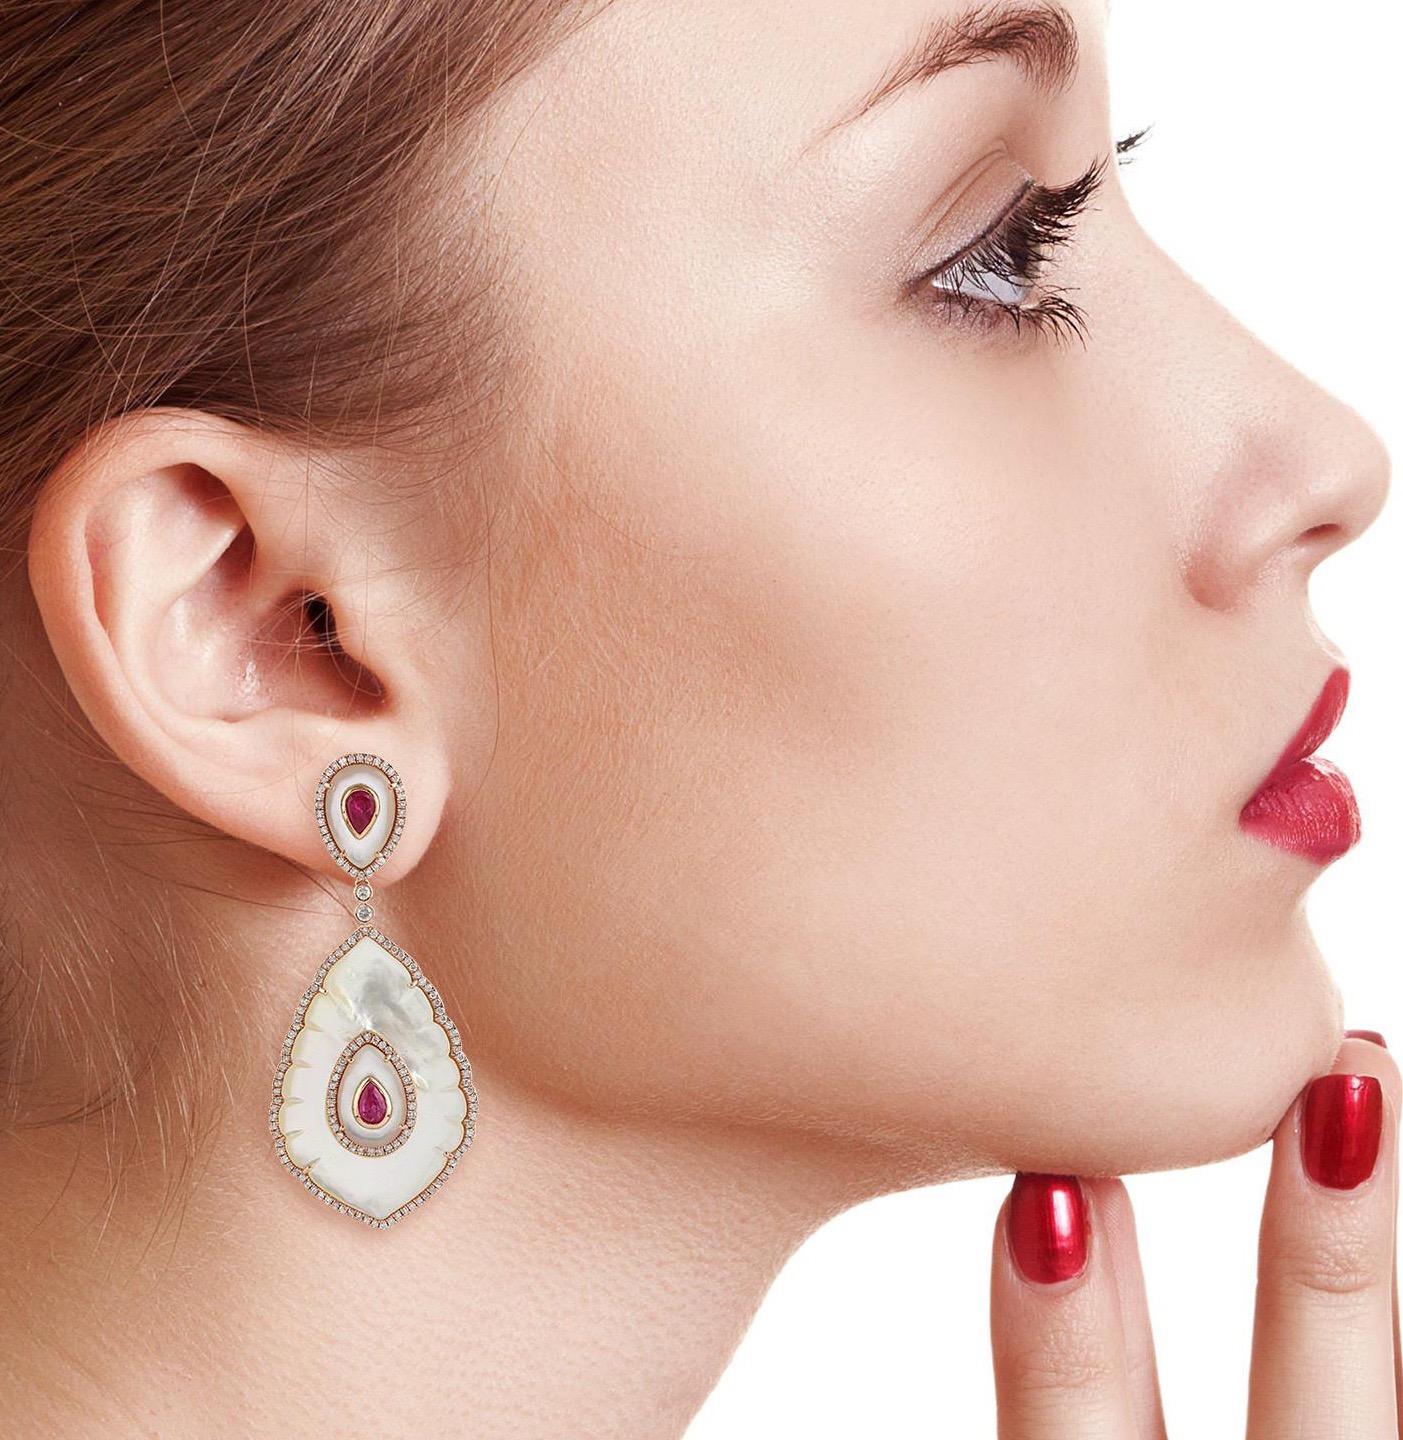 Inspired by the beautiful Taj Mahal. Hand cast from 18-karat gold, these stunning earrings are set with 1.45 carats ruby, 31.17 carats mother of pearl and 1.9 carats of glimmering diamonds. 

FOLLOW  MEGHNA JEWELS storefront to view the latest